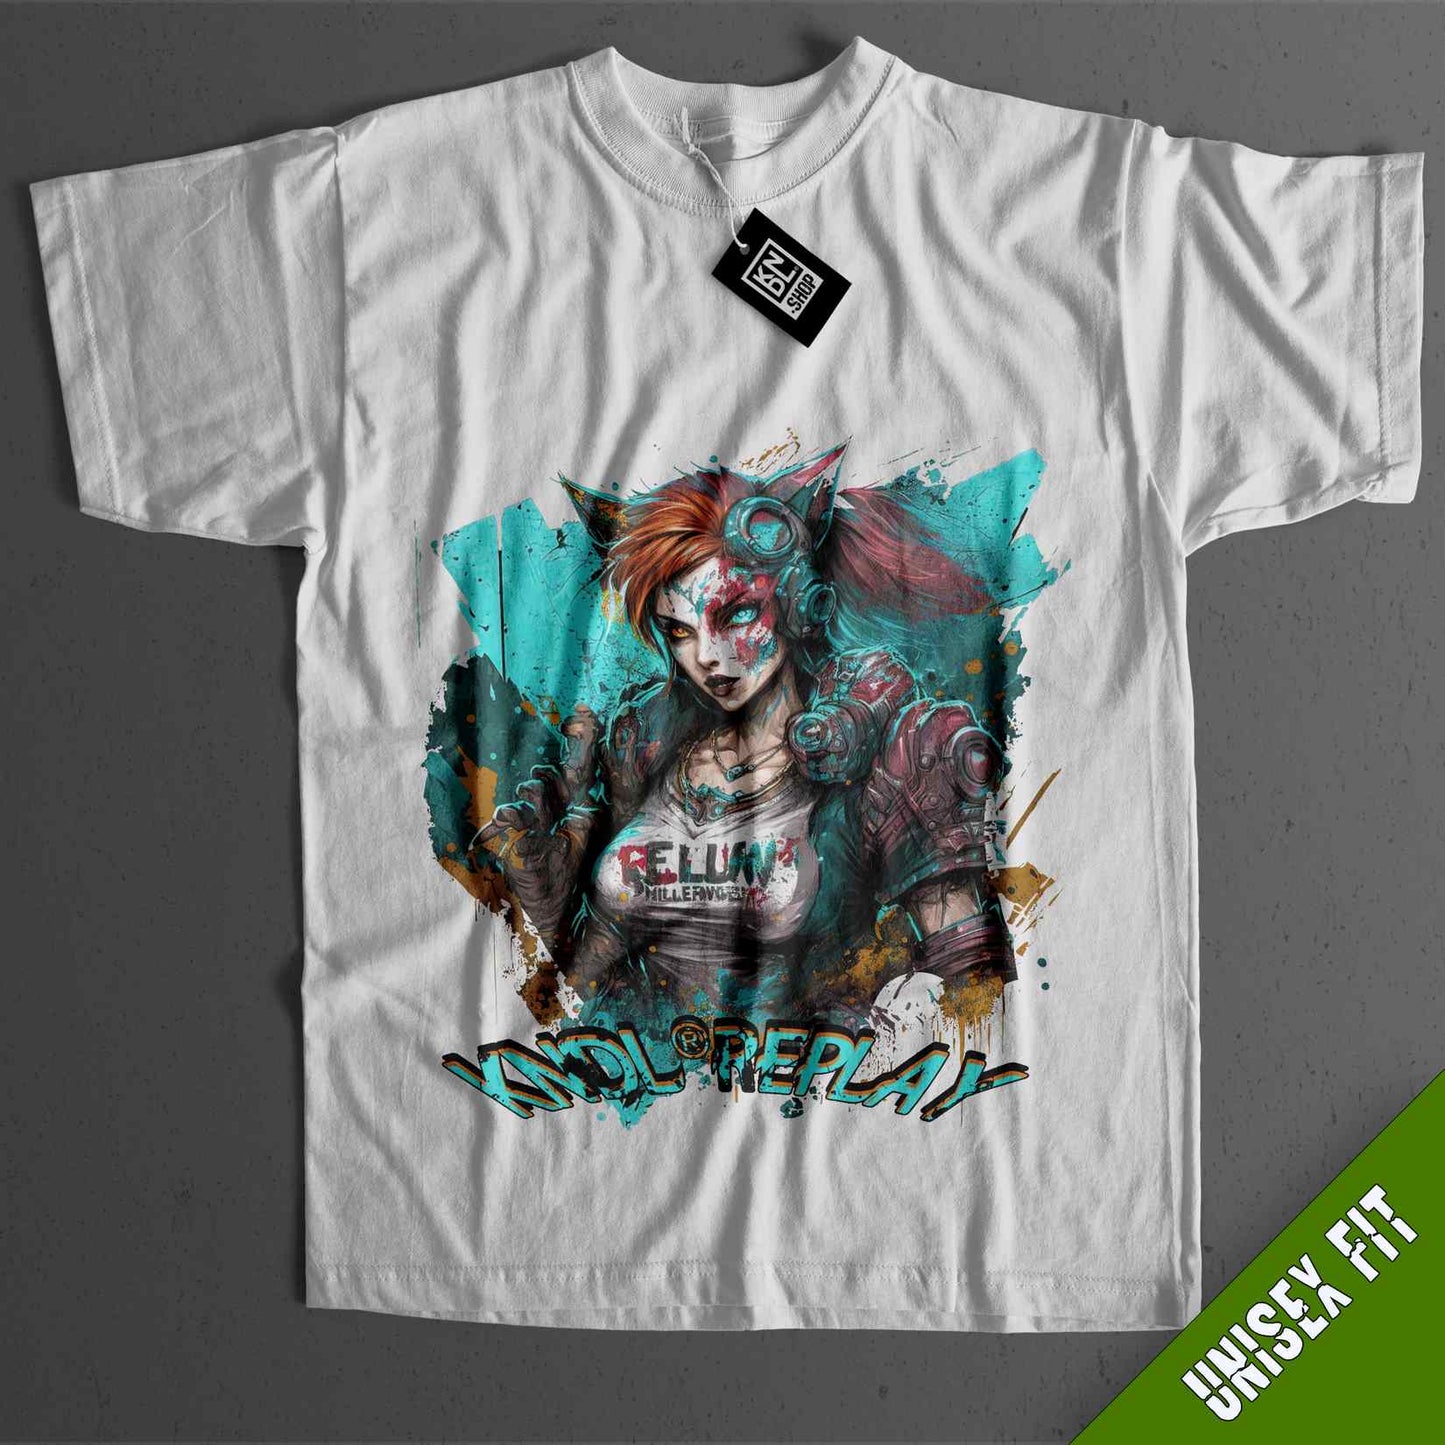 a white t - shirt with a picture of a girl with red hair